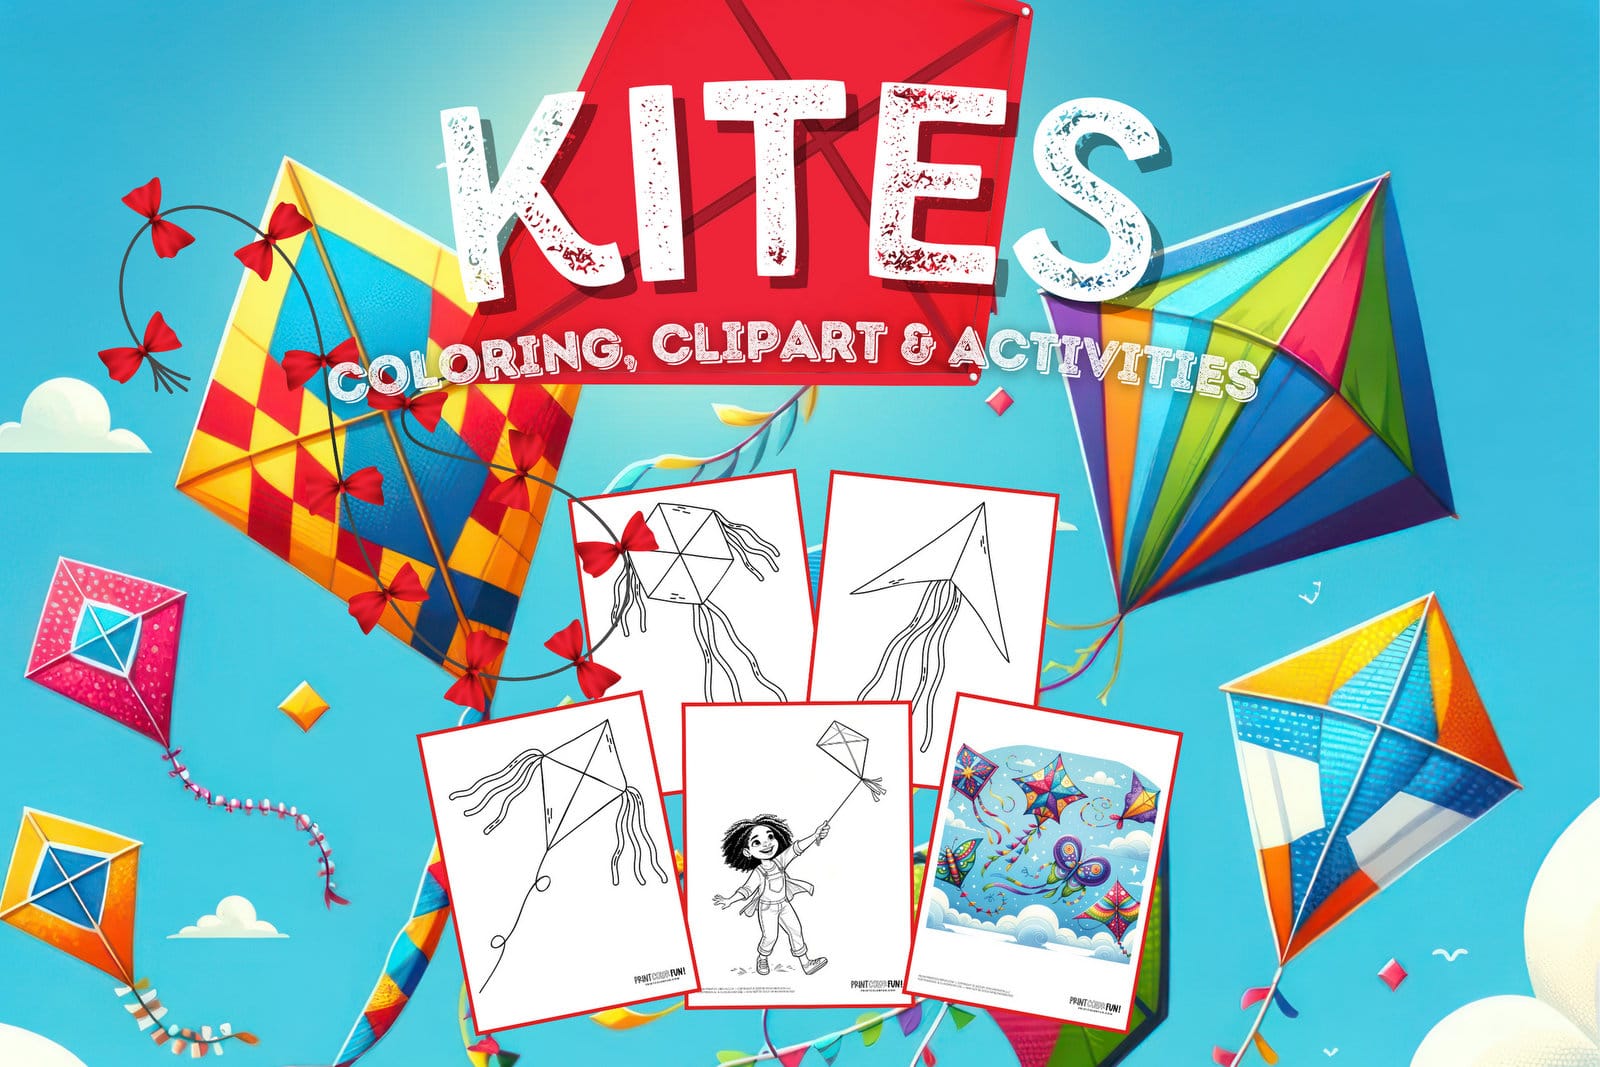 Kite coloring page clipart activities from PrintColorFun com